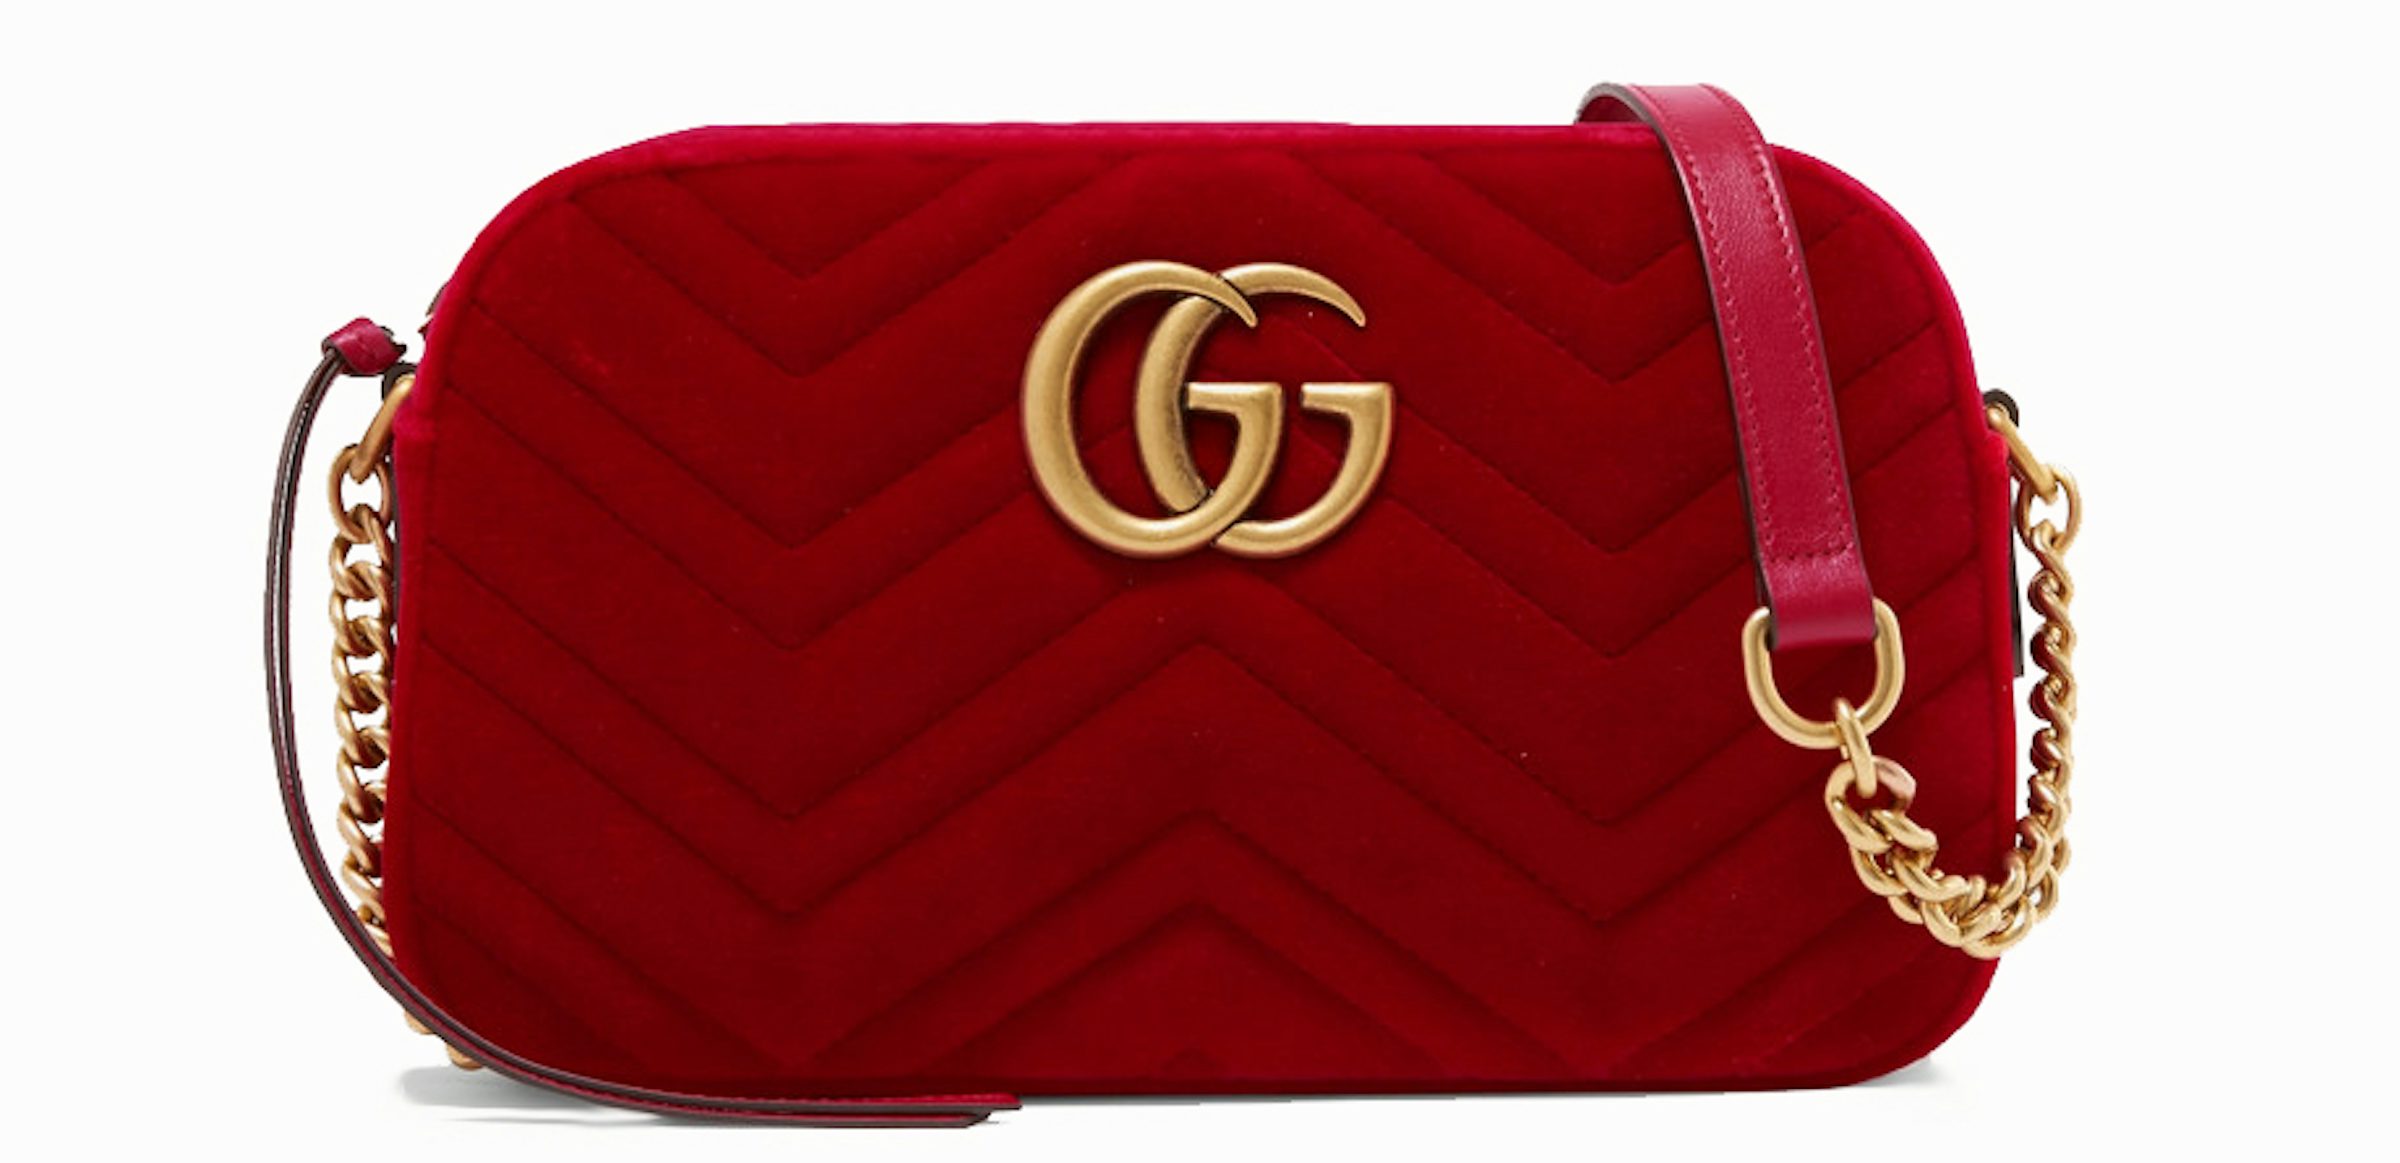 Gucci Small Gg Marmont Velvet Camera Bag in Natural